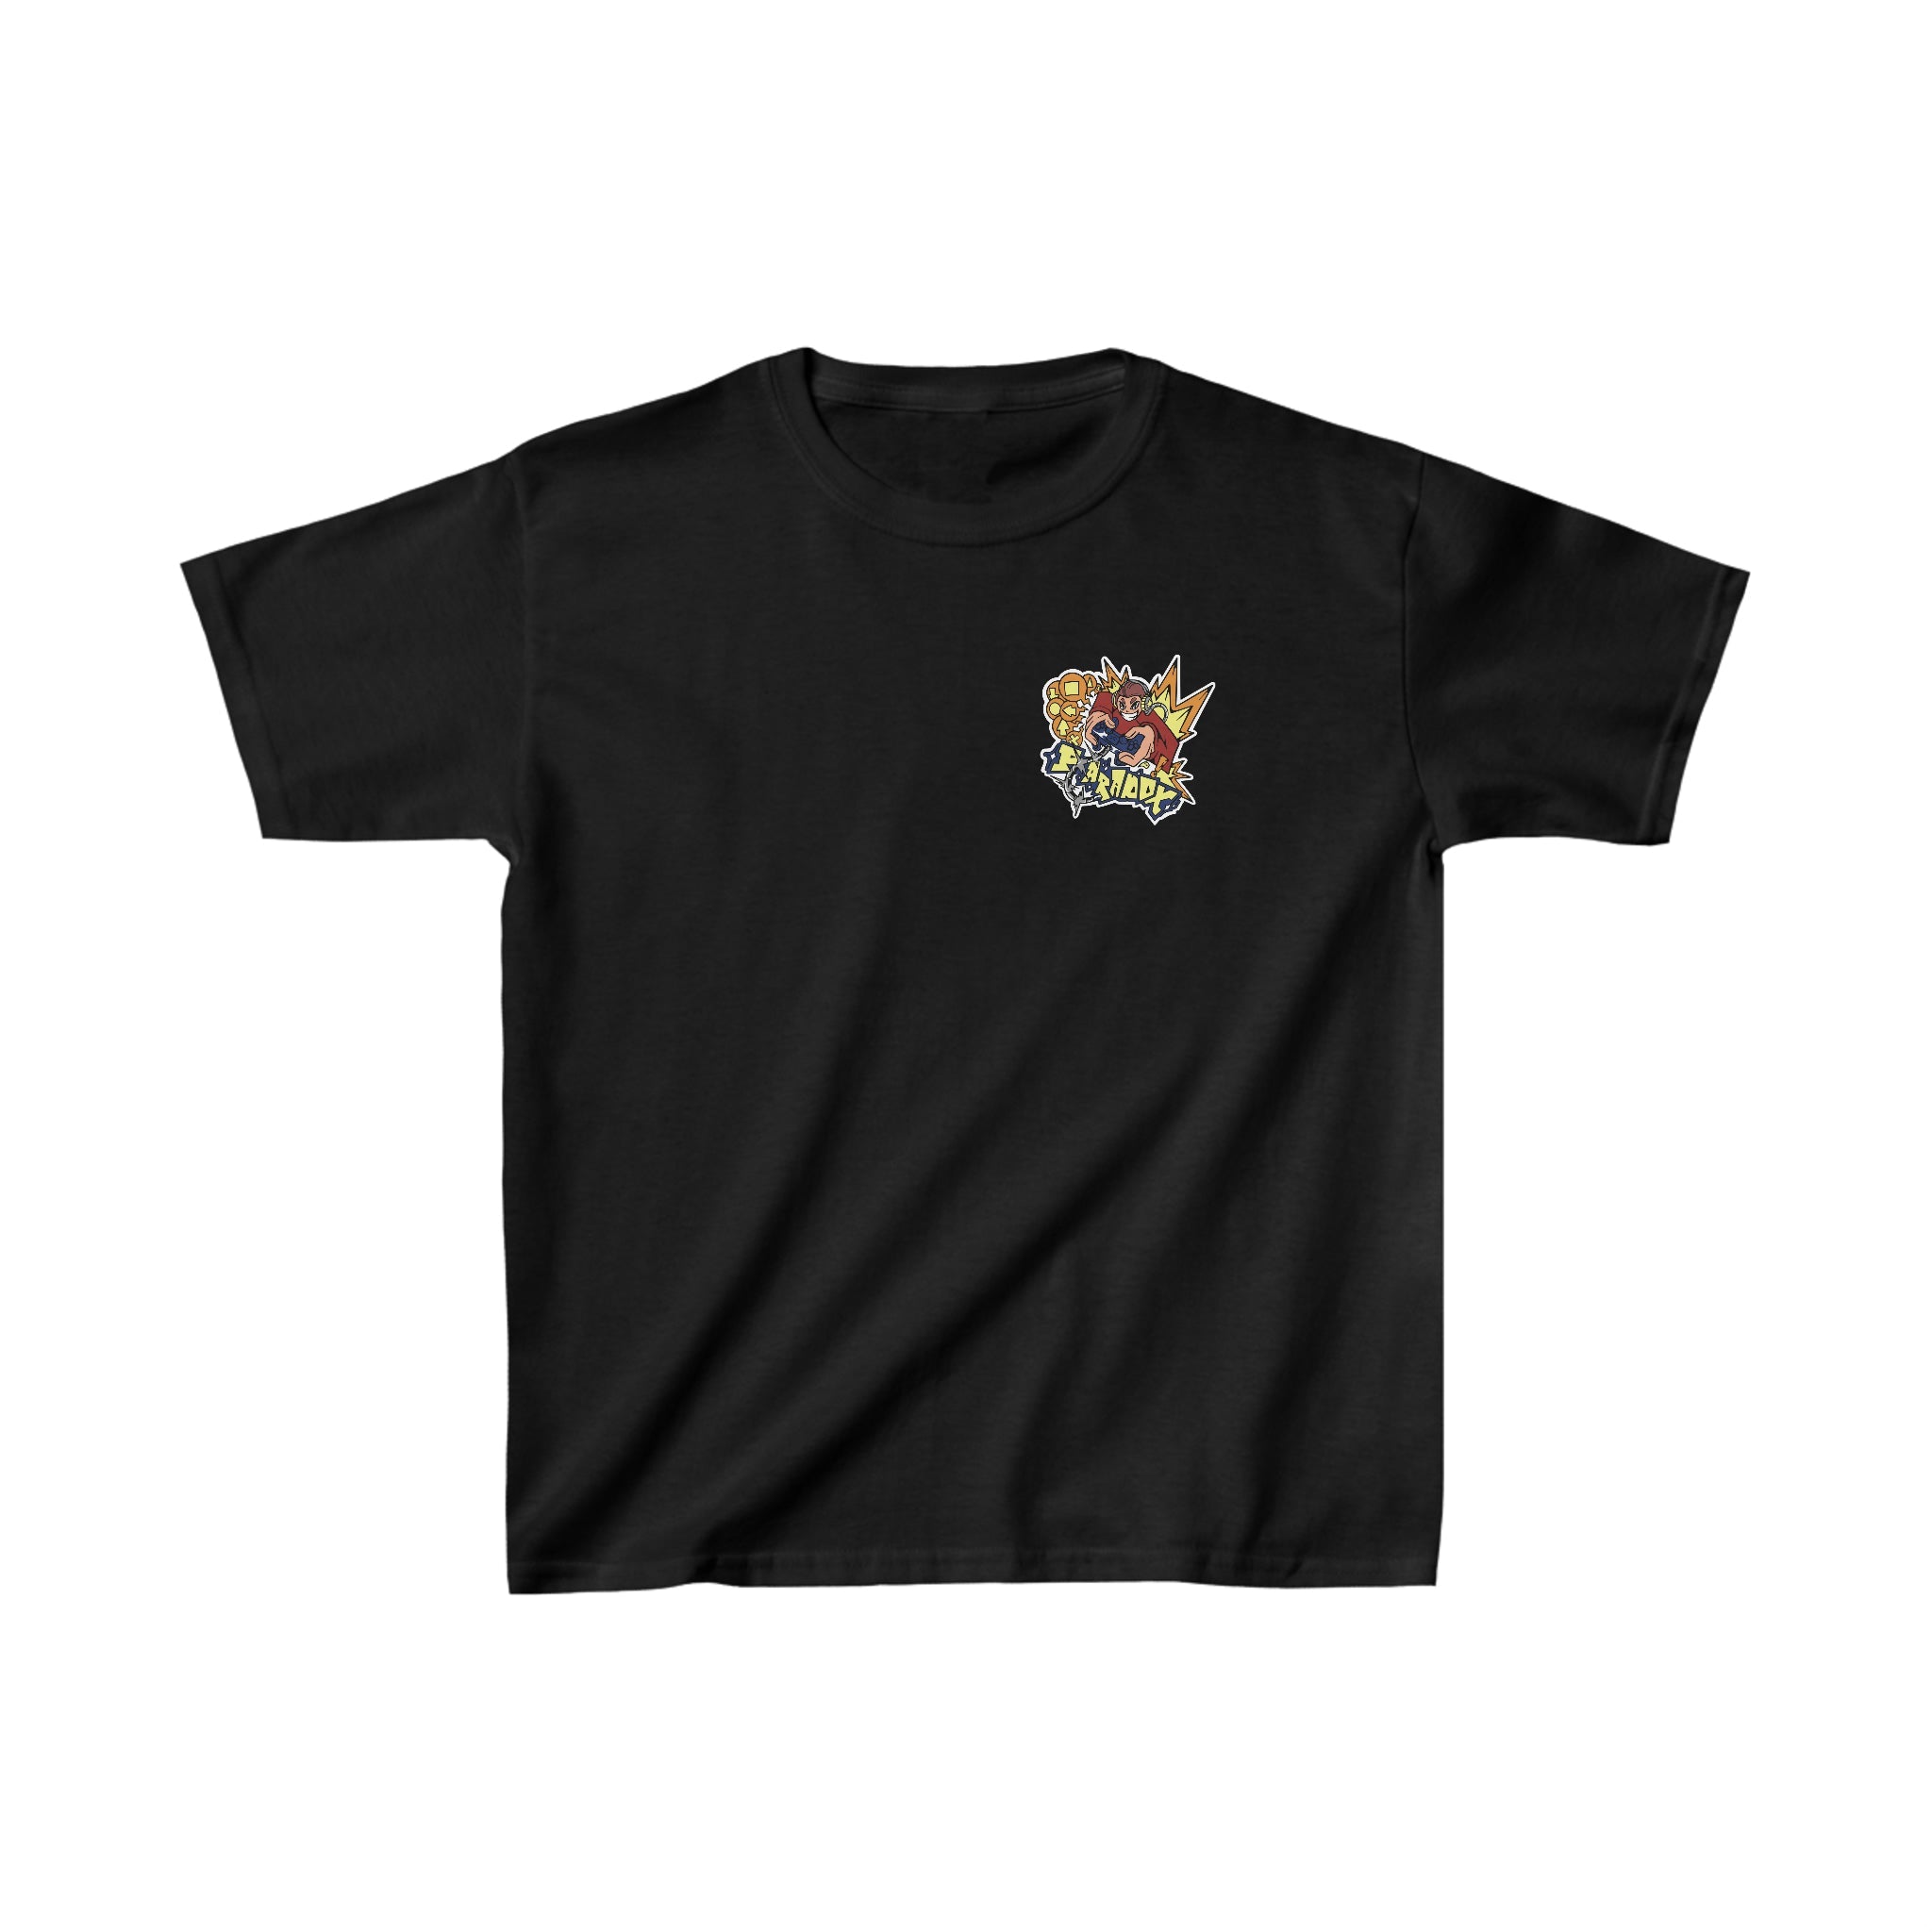 Royale Youth Tee - Dimucc